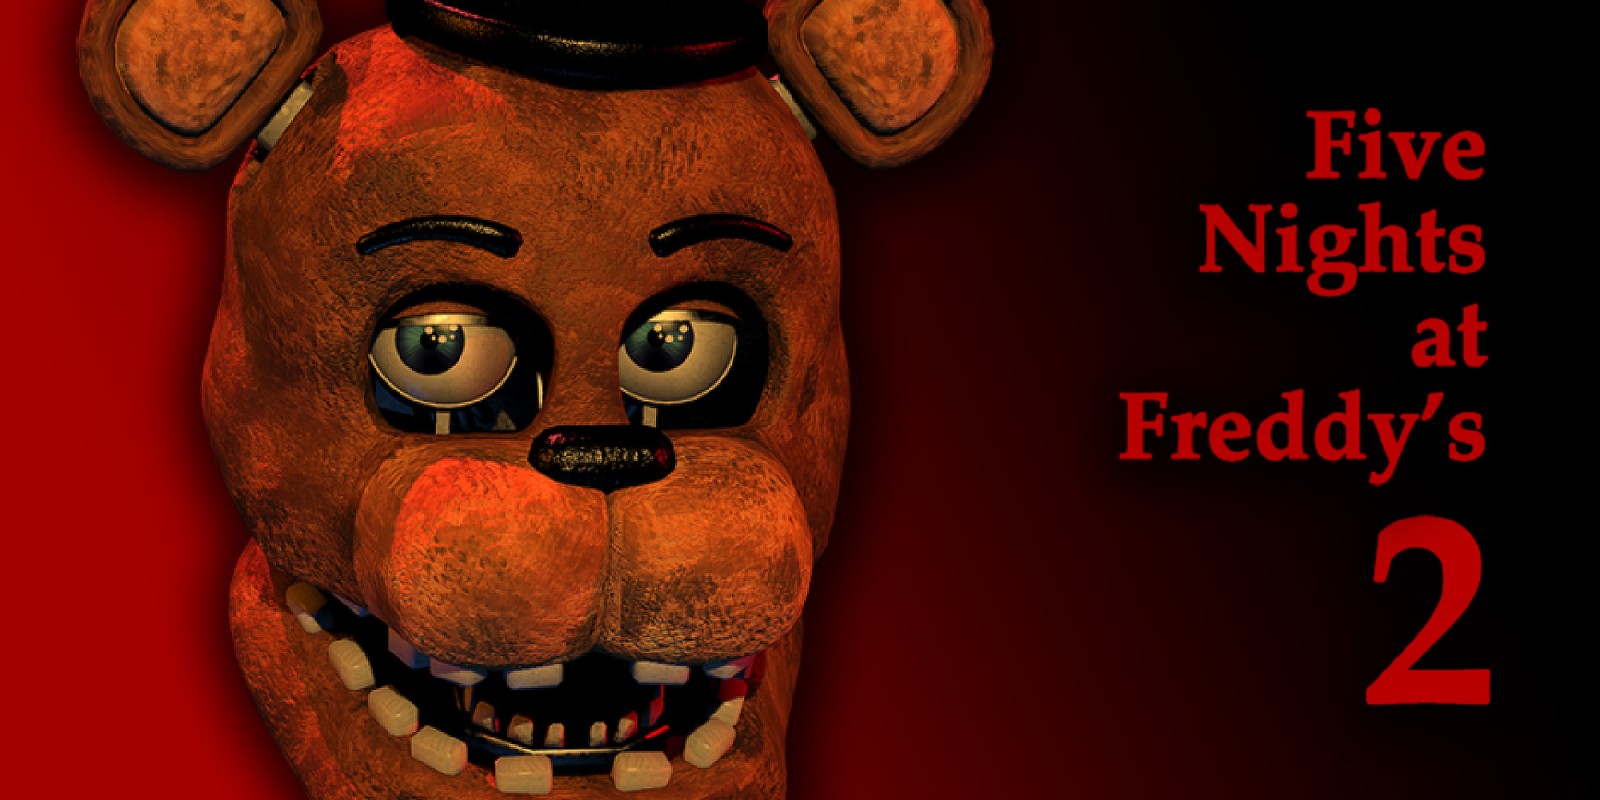 Five Nights At Freddys 2 Remastered Gamejolt Five Nights at Freddy's 2 Switch footage - Nintendo Everything